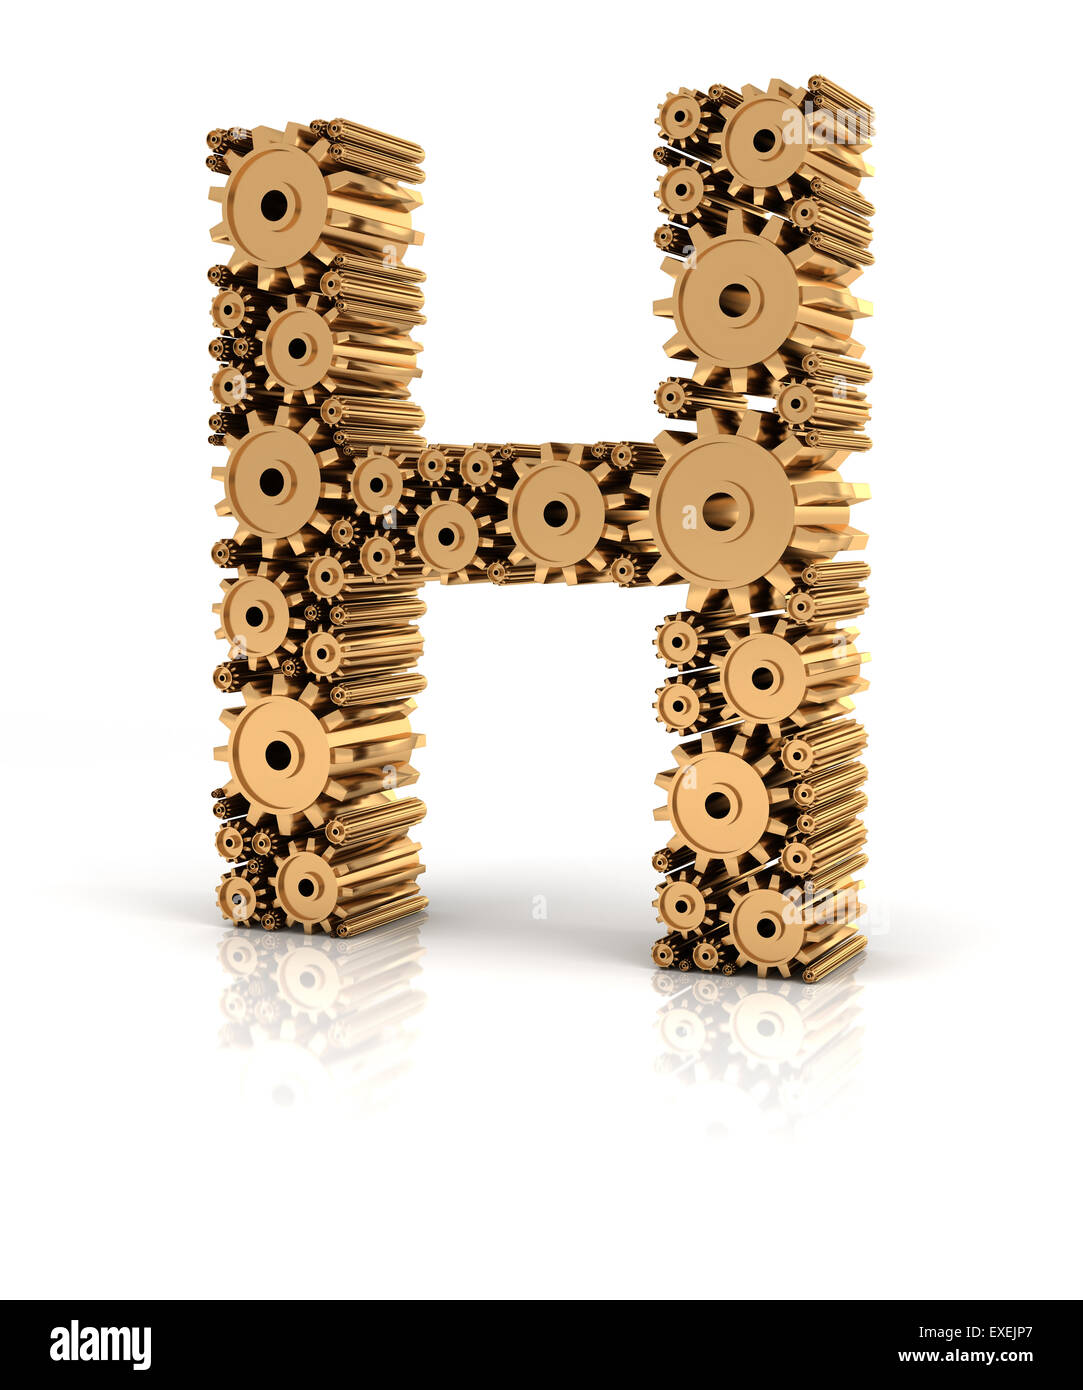 Alphabet H formed by gears Stock Photo